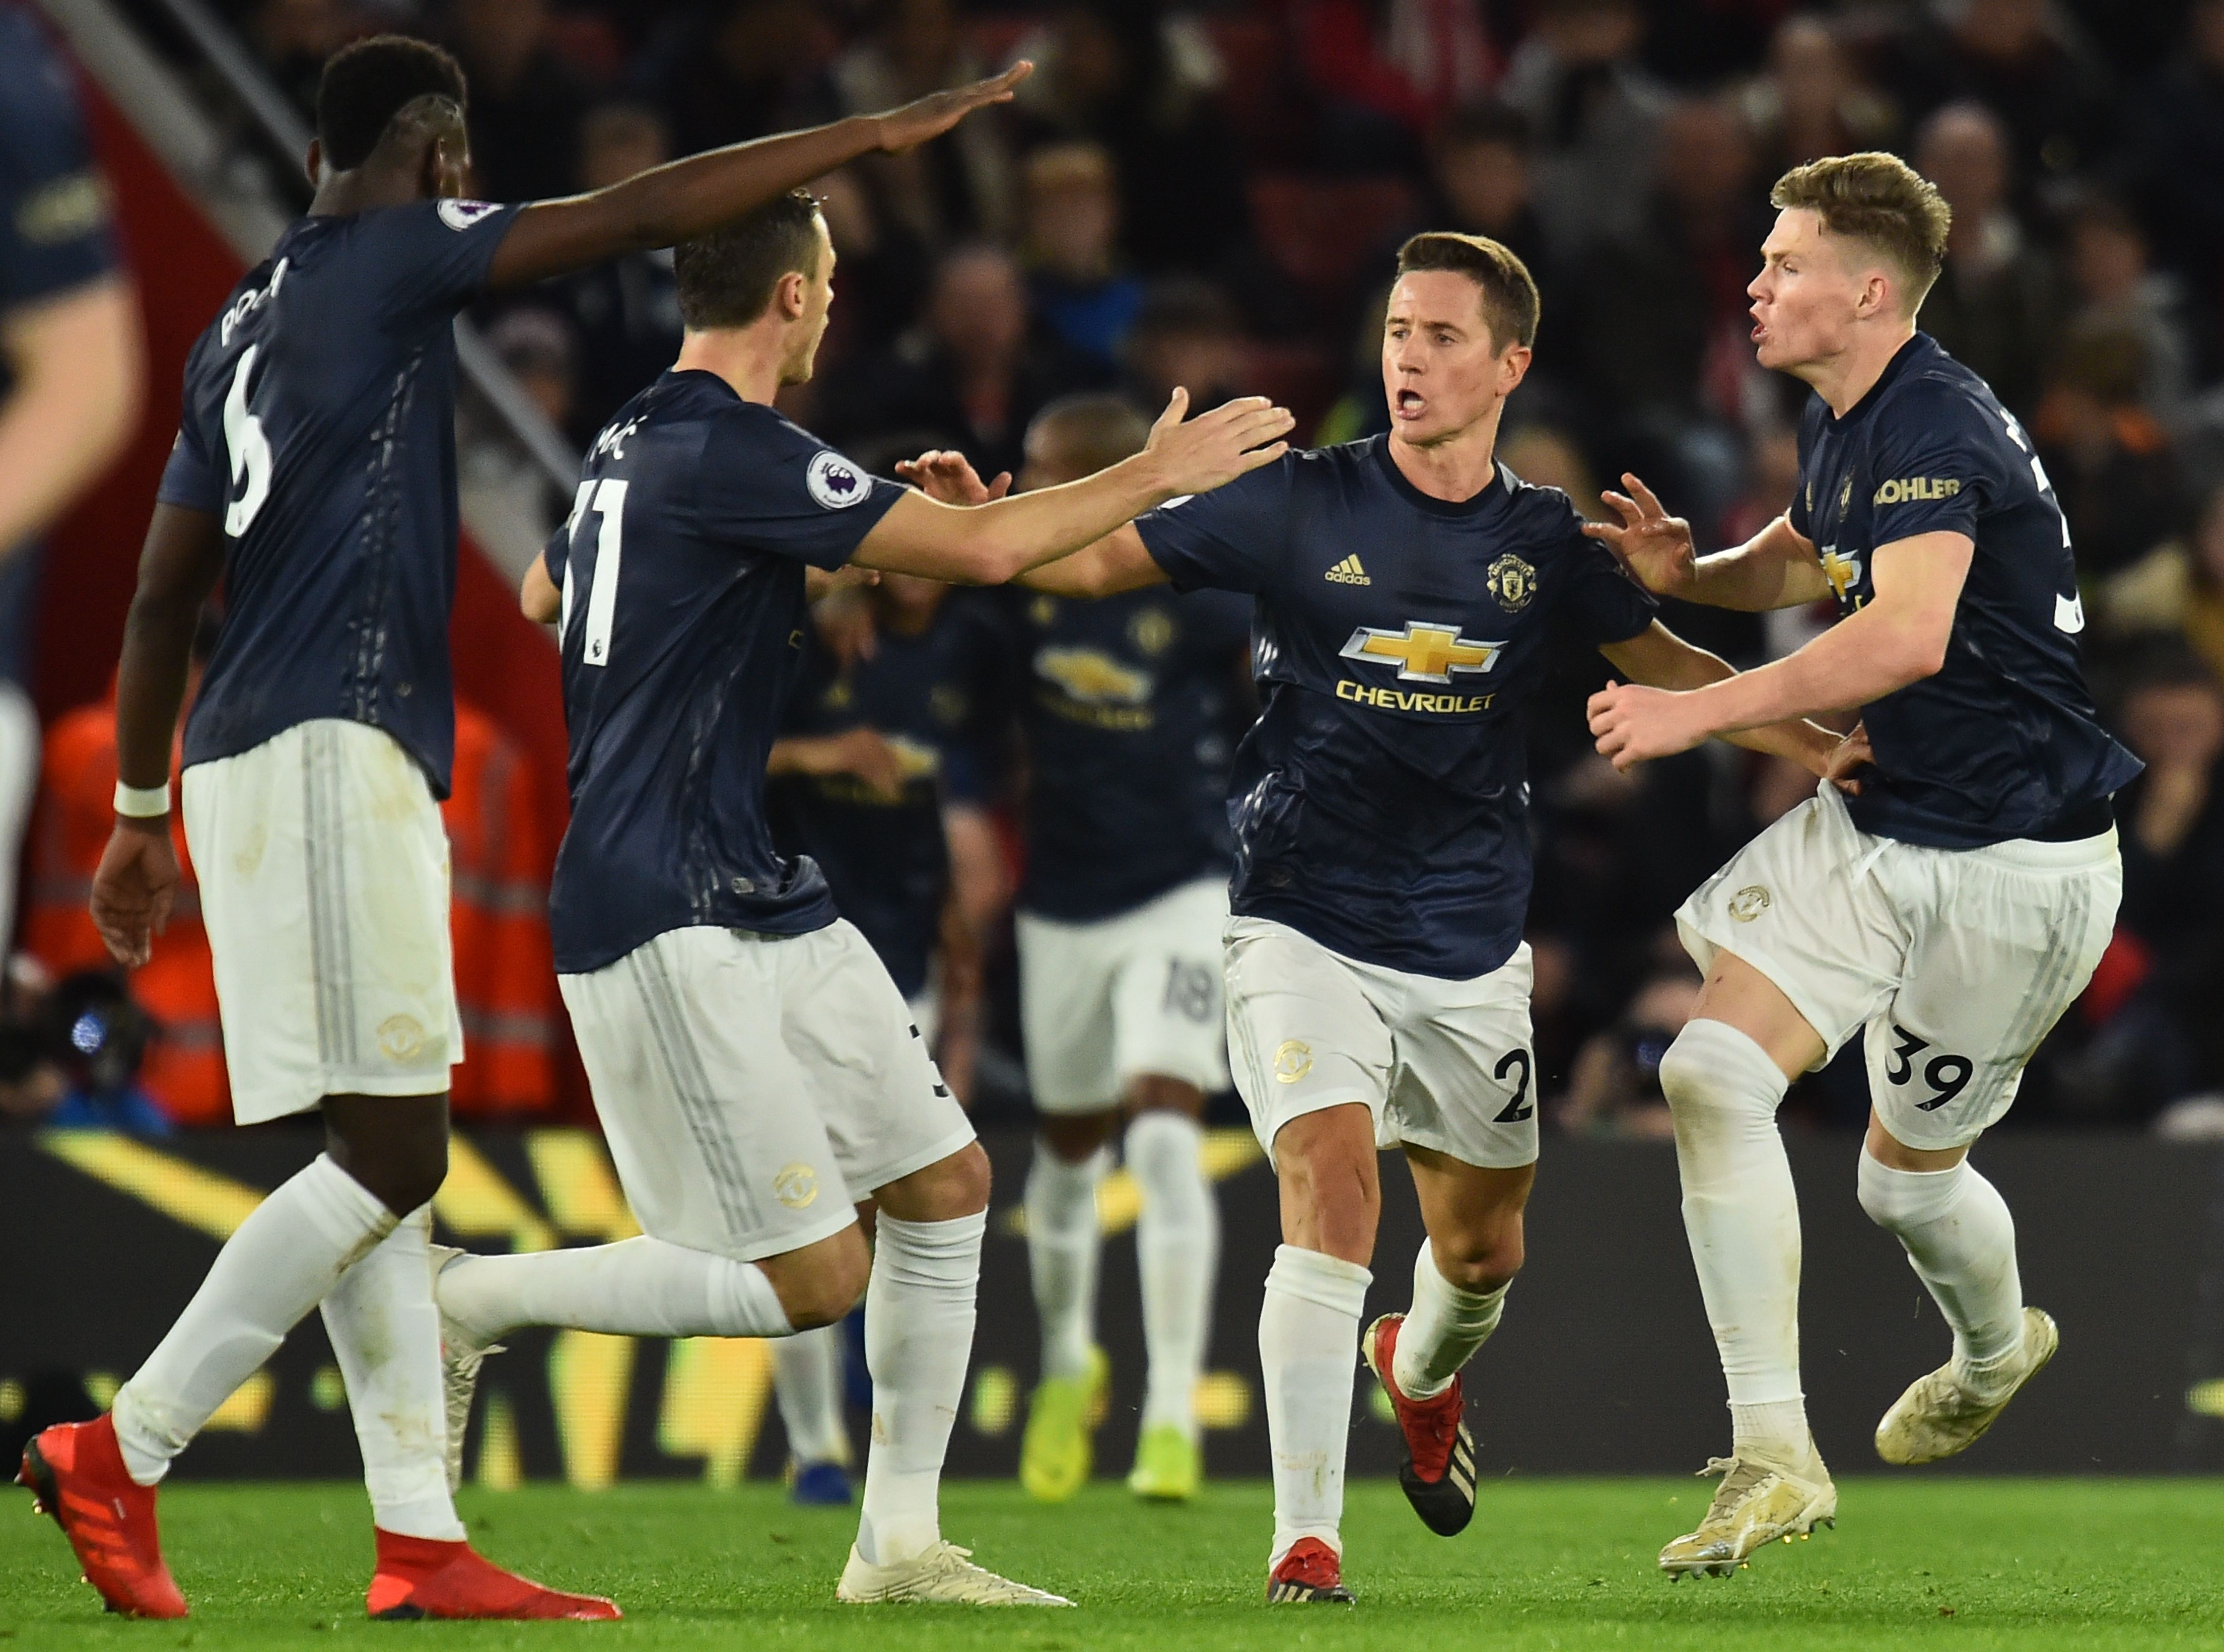 Manchester United's Spanish midfielder Ander Herrera (2R) celebrates scoring their second goal to equalise 2-2 during the English Premier League football match between Southampton and Manchester United at St Mary's Stadium in Southampton, southern England on December 1, 2018. (Photo by Glyn KIRK / AFP) / RESTRICTED TO EDITORIAL USE. No use with unauthorized audio, video, data, fixture lists, club/league logos or 'live' services. Online in-match use limited to 120 images. An additional 40 images may be used in extra time. No video emulation. Social media in-match use limited to 120 images. An additional 40 images may be used in extra time. No use in betting publications, games or single club/league/player publications. /         (Photo credit should read GLYN KIRK/AFP/Getty Images)